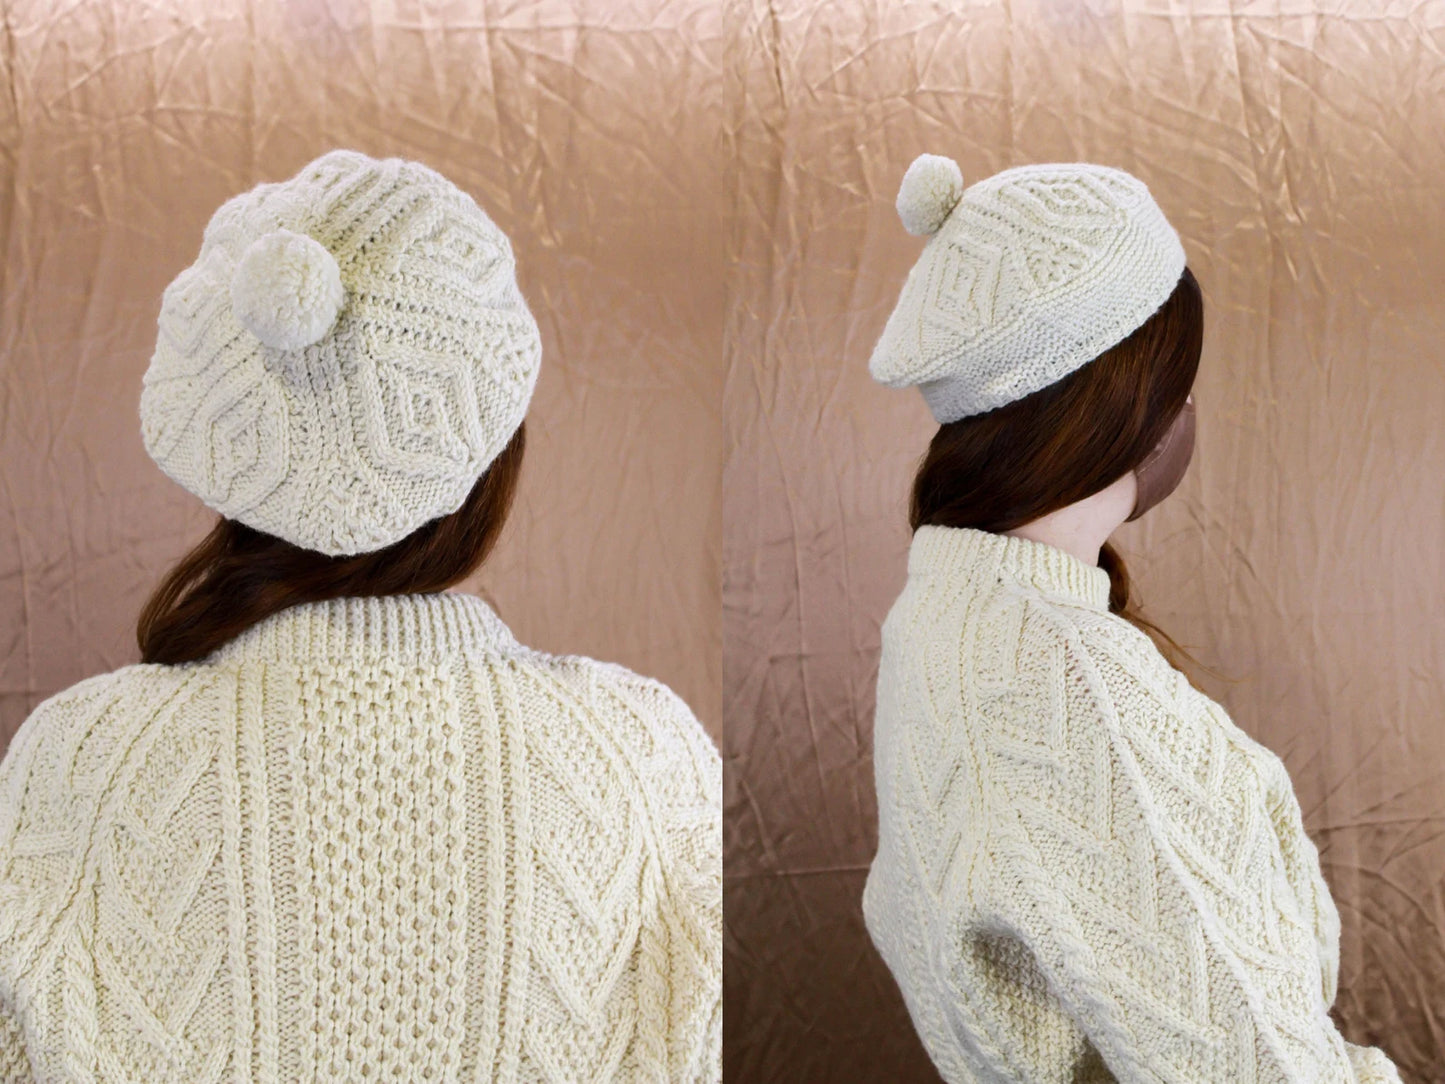 Vintage Cream Wool Aran Carbery Fisherman Sweater and Matching Knit Tam/Beret with Pom Pom, Hand Knit in Ireland